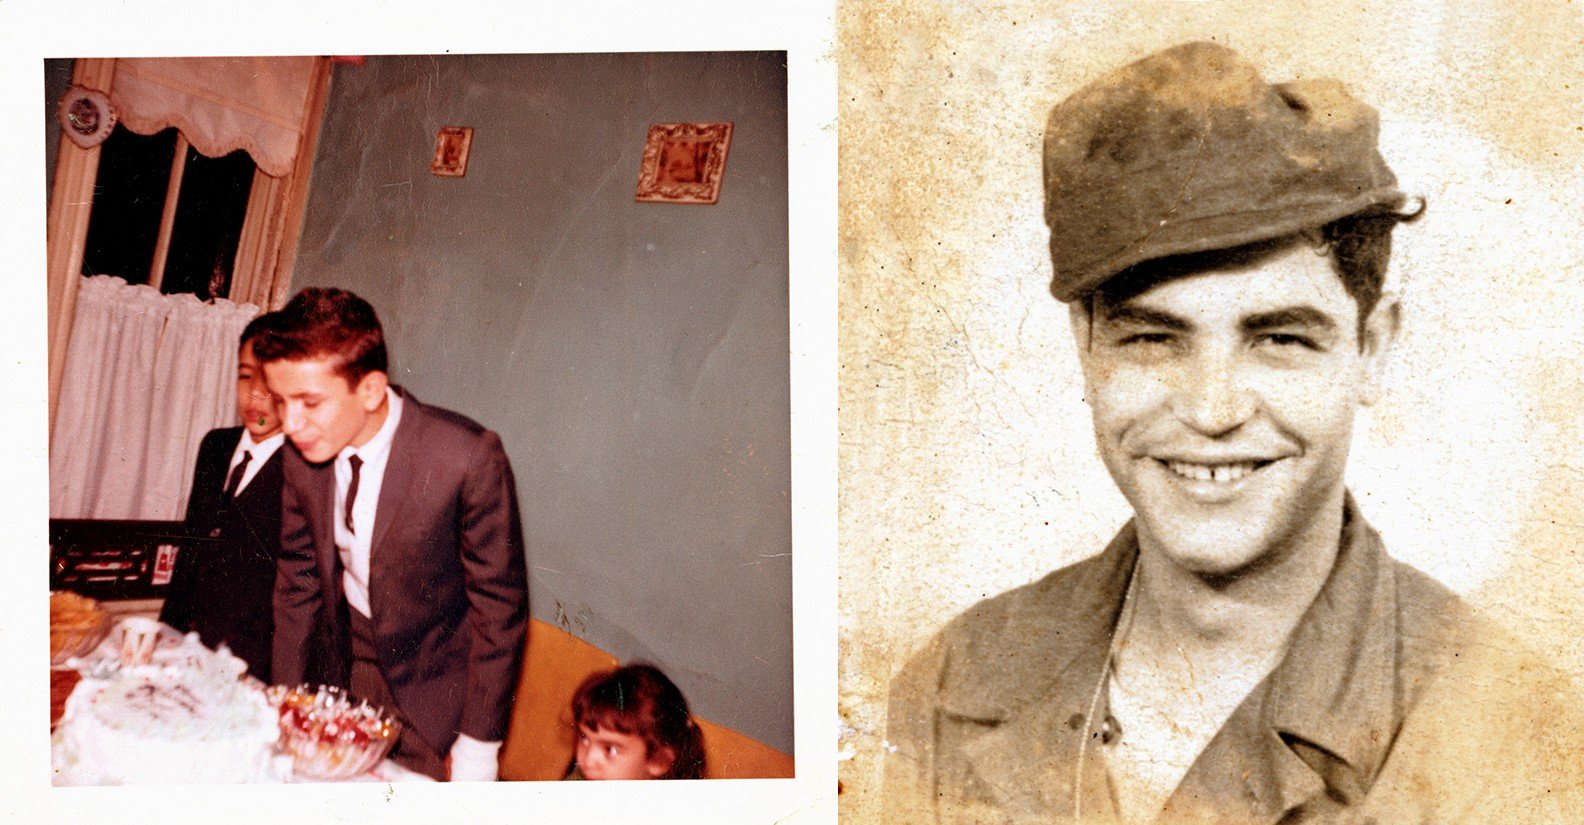 Two photos. (Left) Jose Velez blows out the candles on his birthday cake. (Right) A headshot of a smiling Andy Velez in military attire